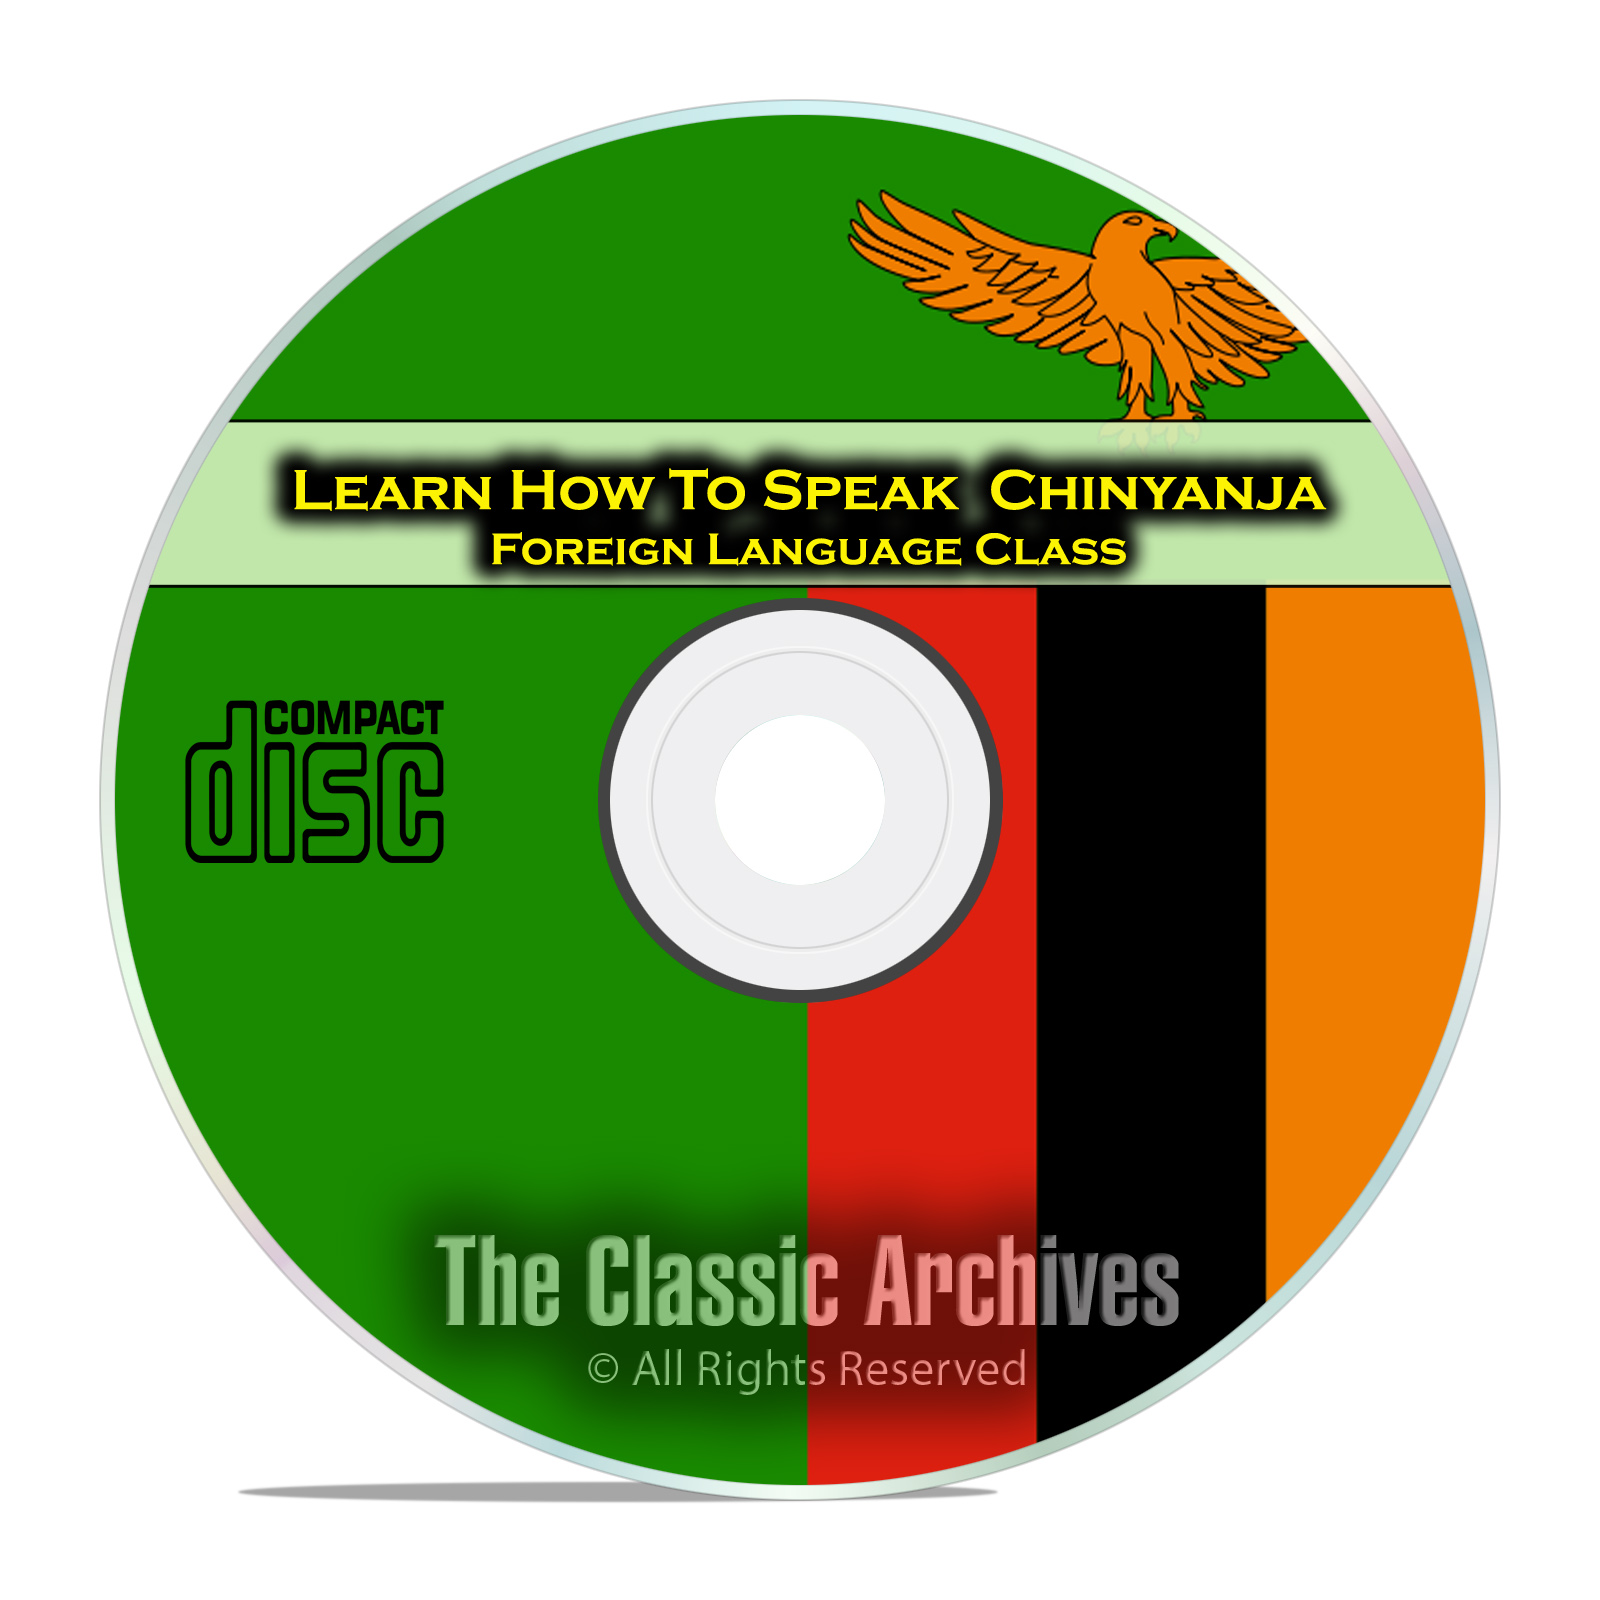 Learn How To Speak Chinyanja, Fast Foreign Language Training Course, CD